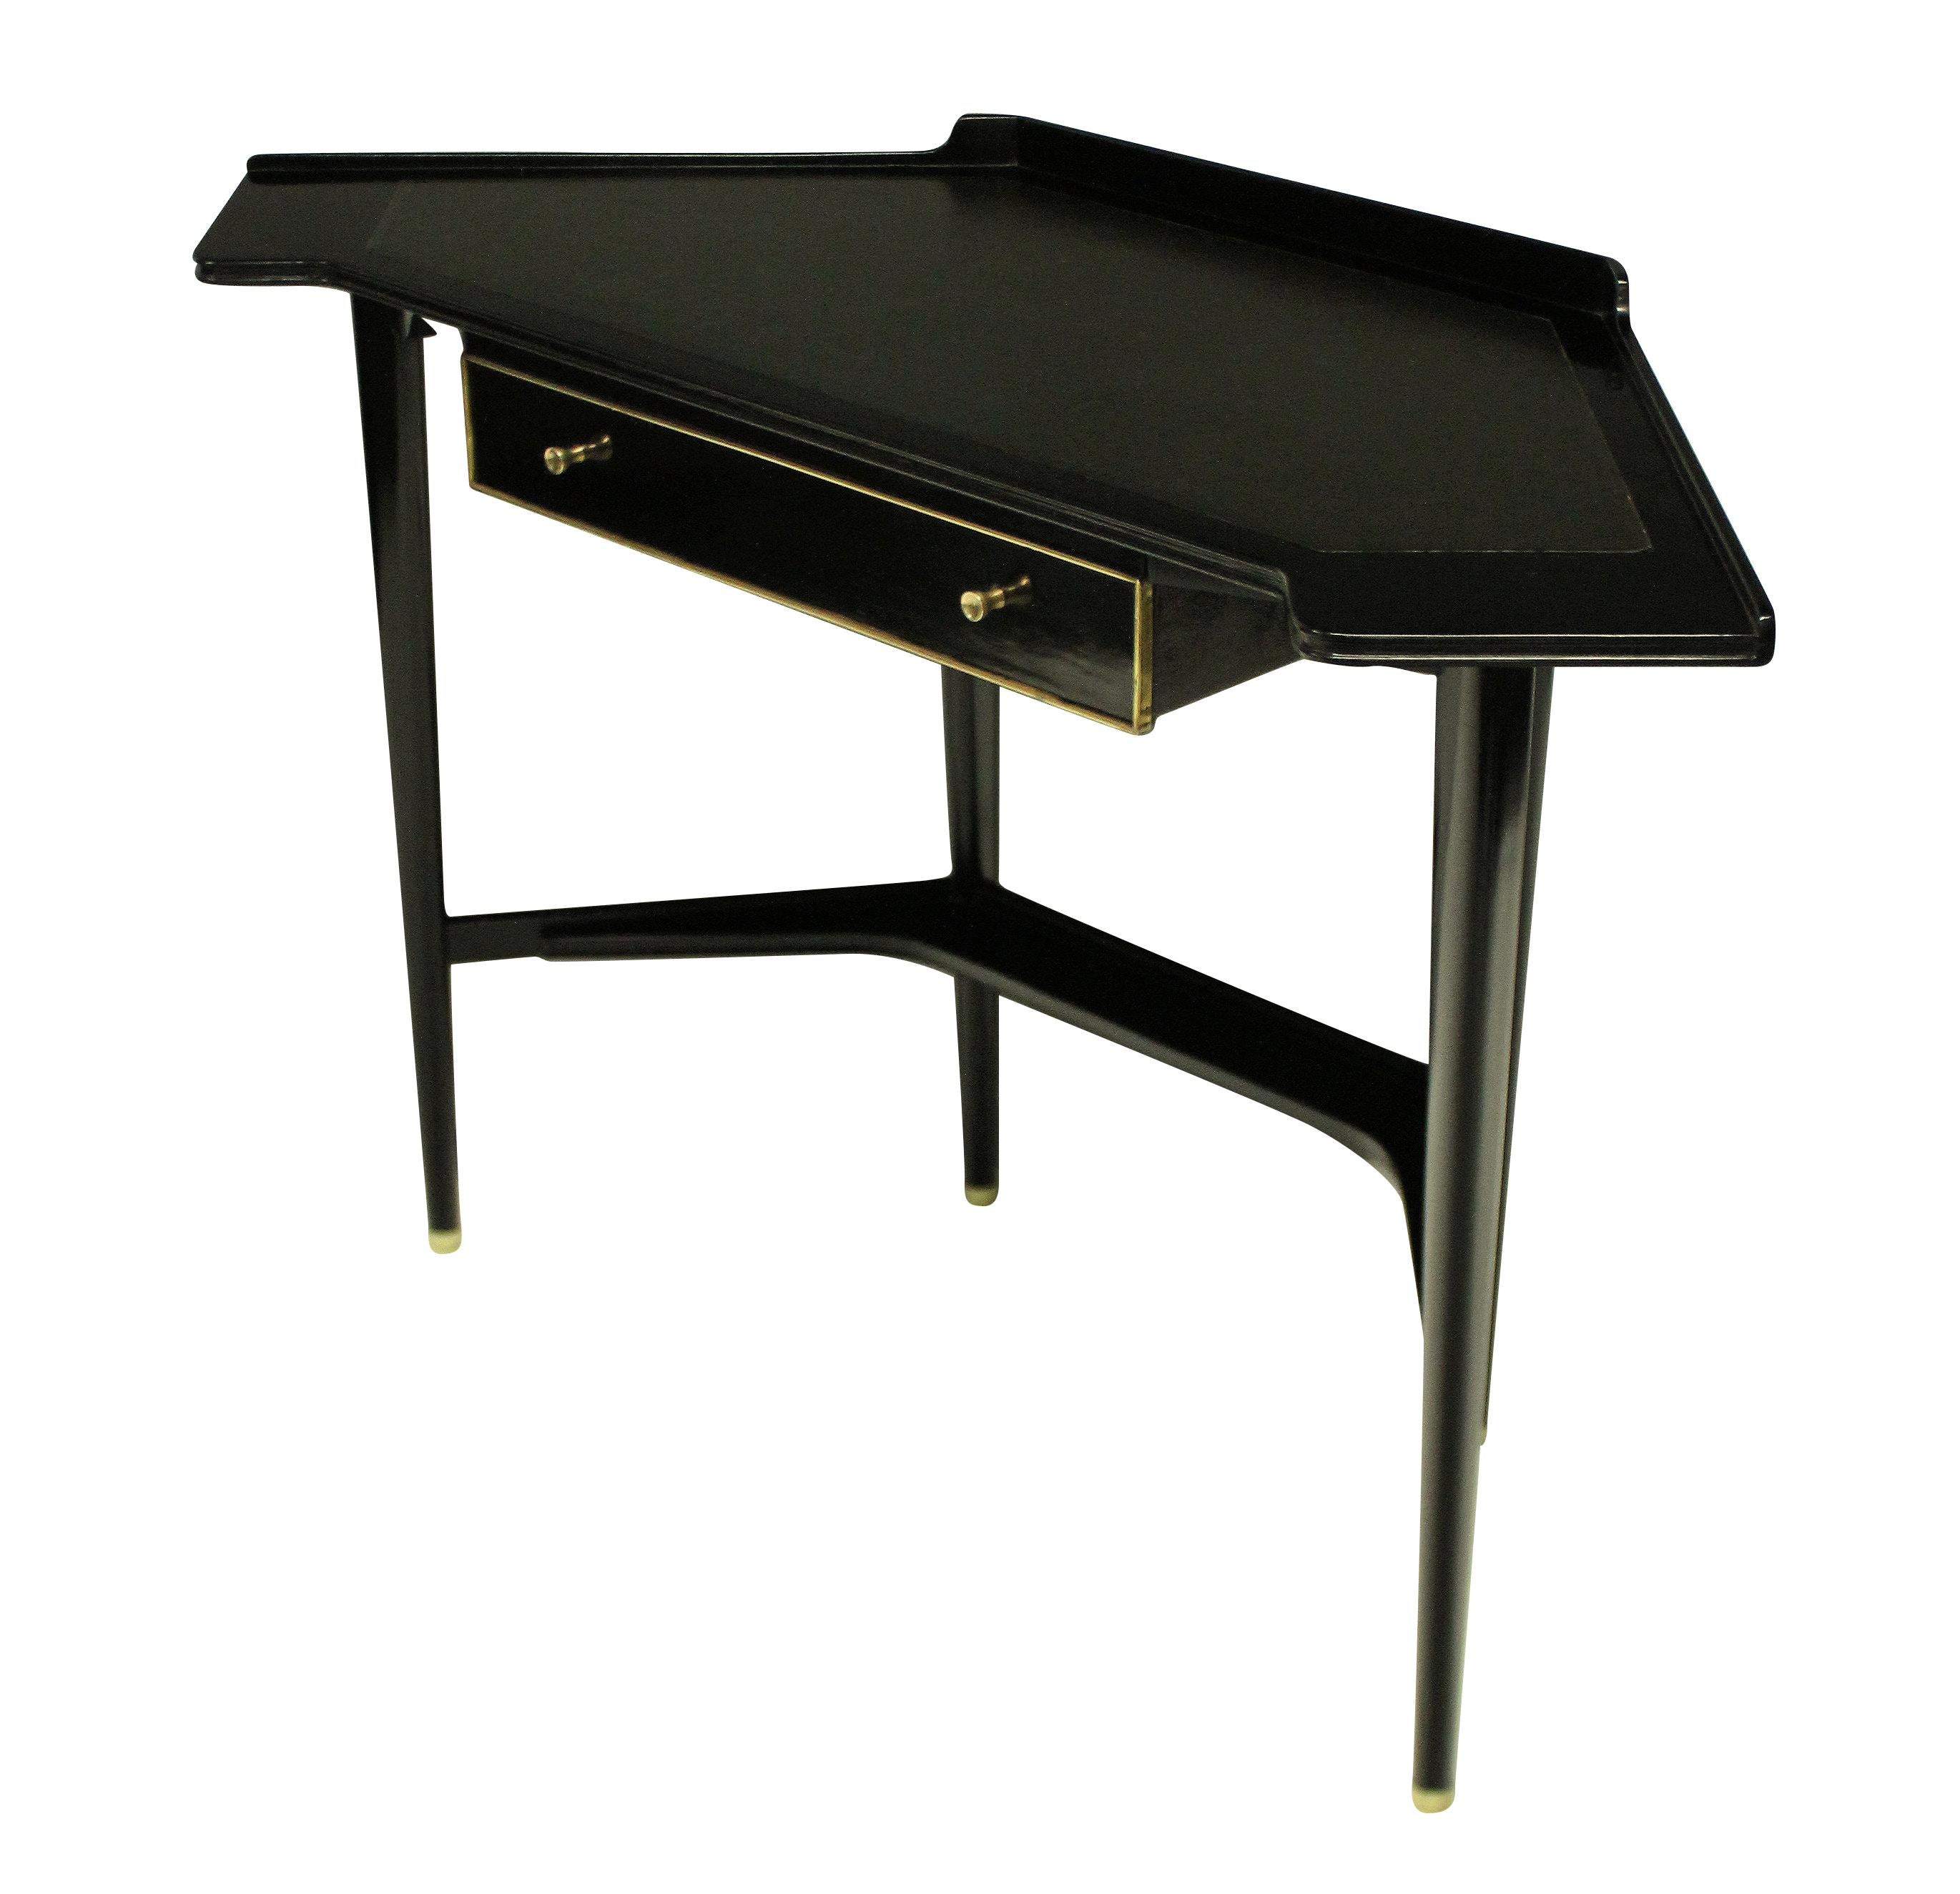 A French midcentury corner desk, ebonized, with brass detailing and a charcoal grey leather top.